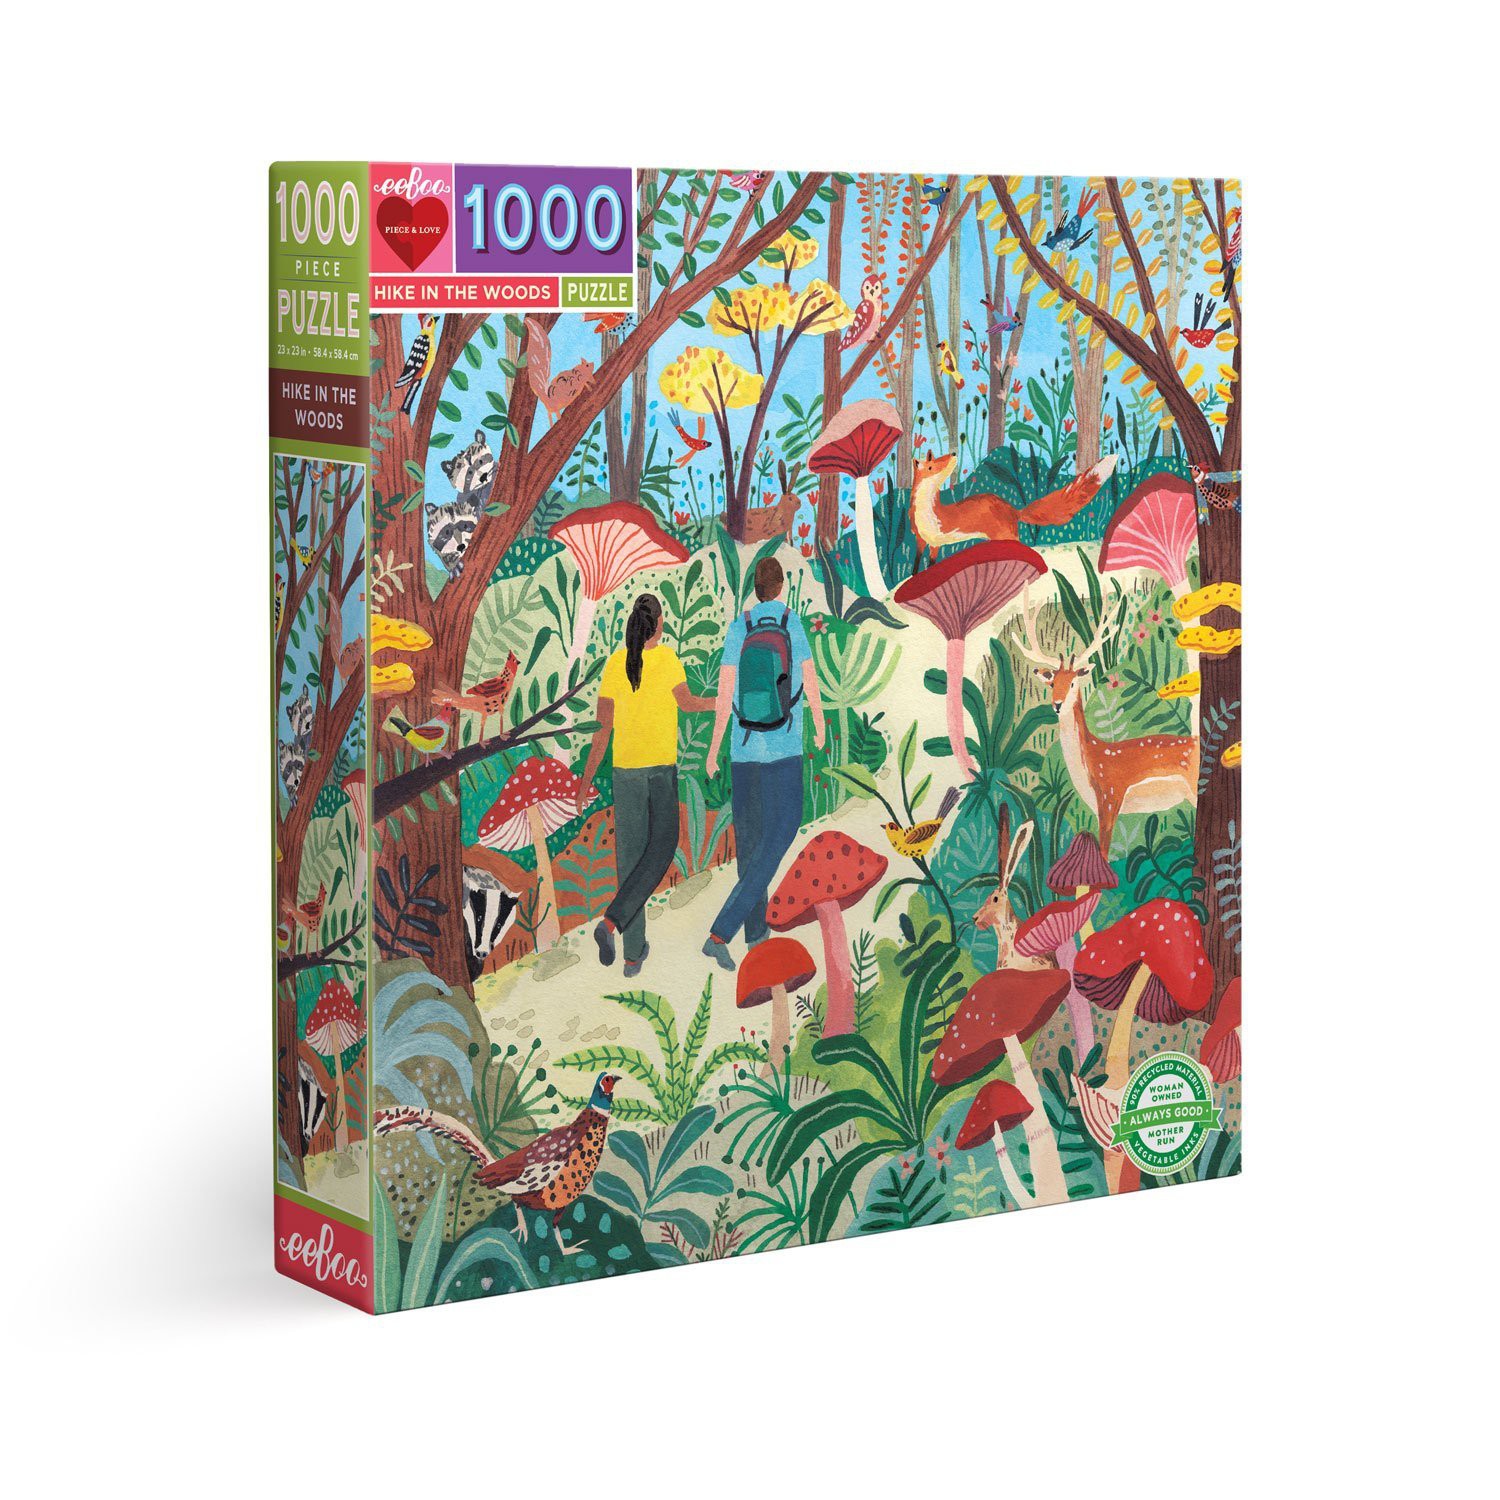 Hike in the Woods 1000 Piece Puzzle - eeBoo